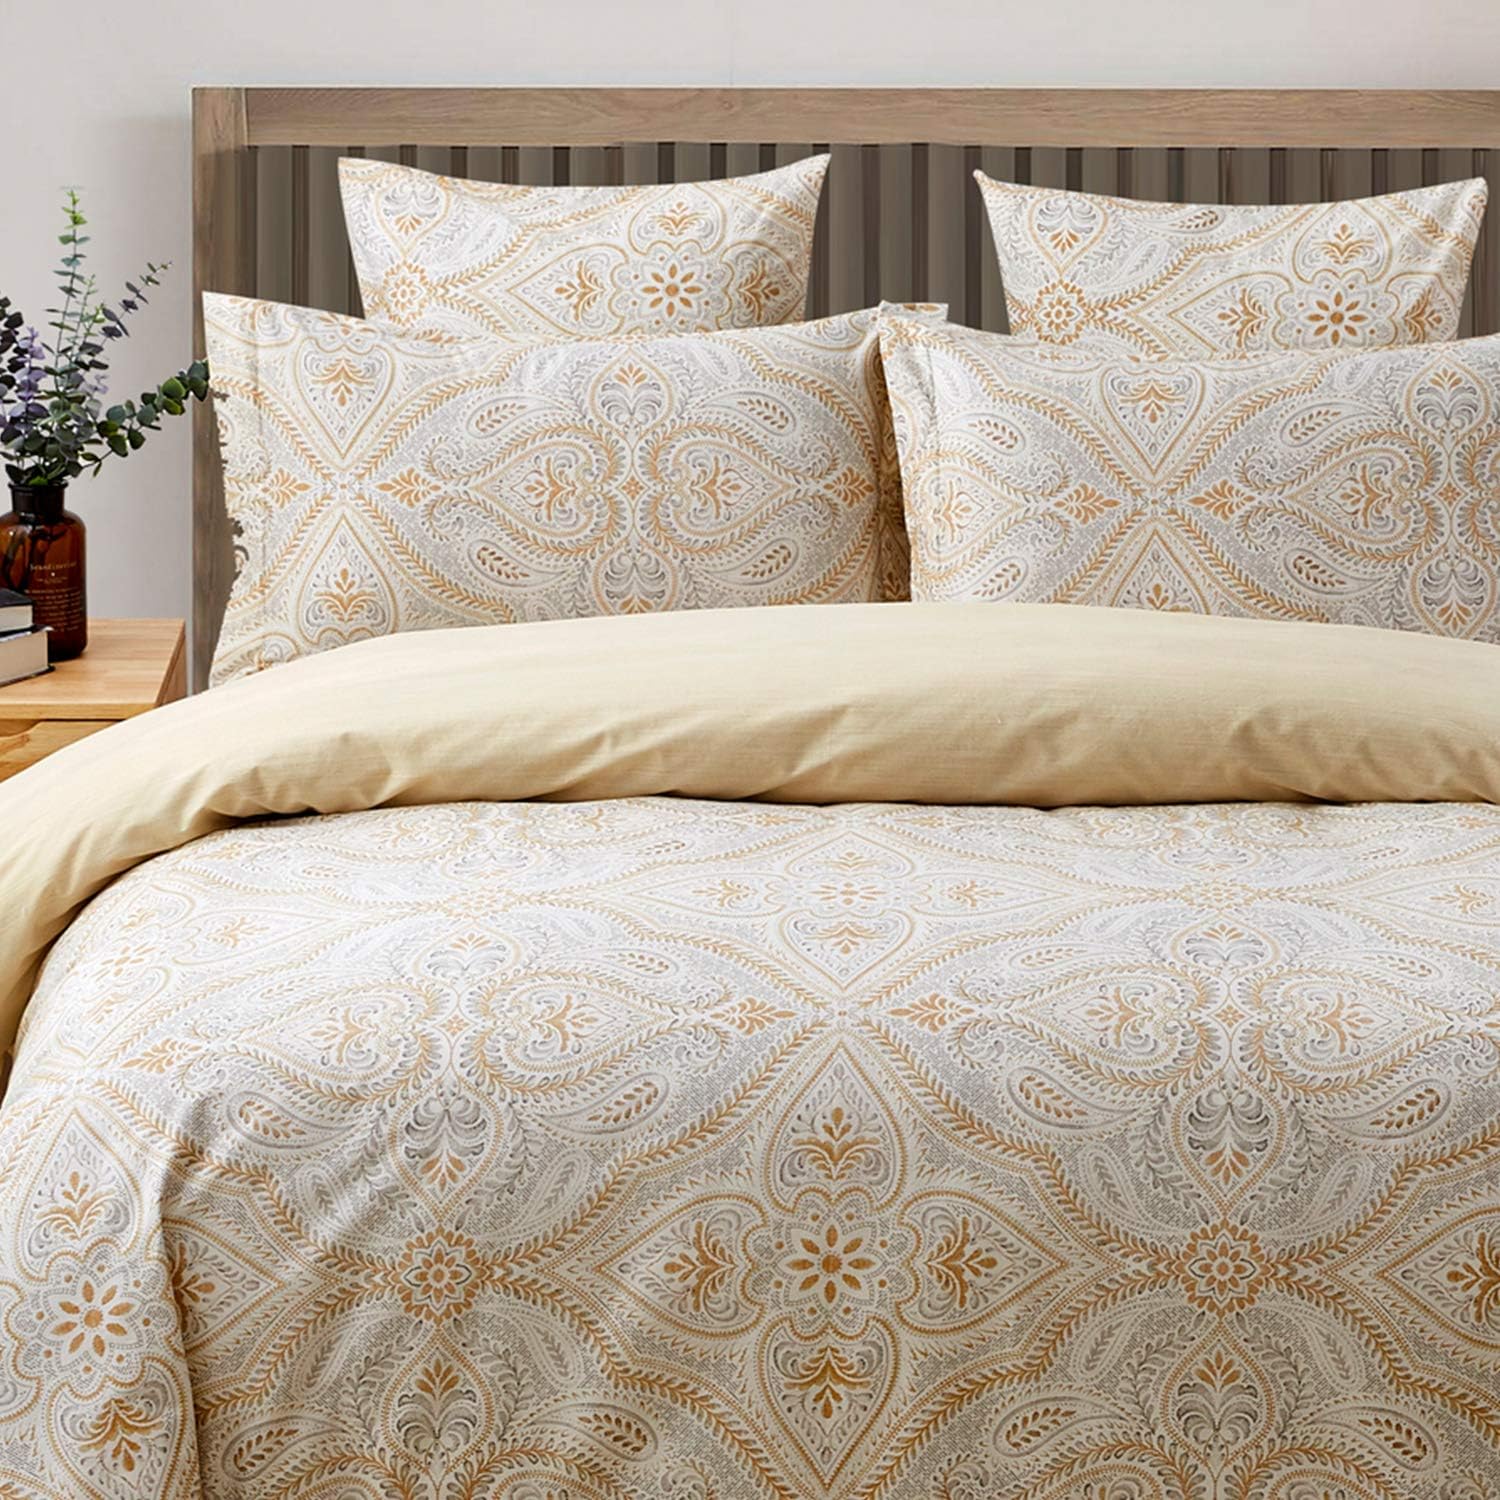 FADFAY Duvet Cover Set Twin Size Paisley Bedding 100% Cotton Ultra Soft Gold Classy Luxurious Bedding with Hidden Zipper Closure 3 Pieces, 1Duvet Cover & 2Pillowcases